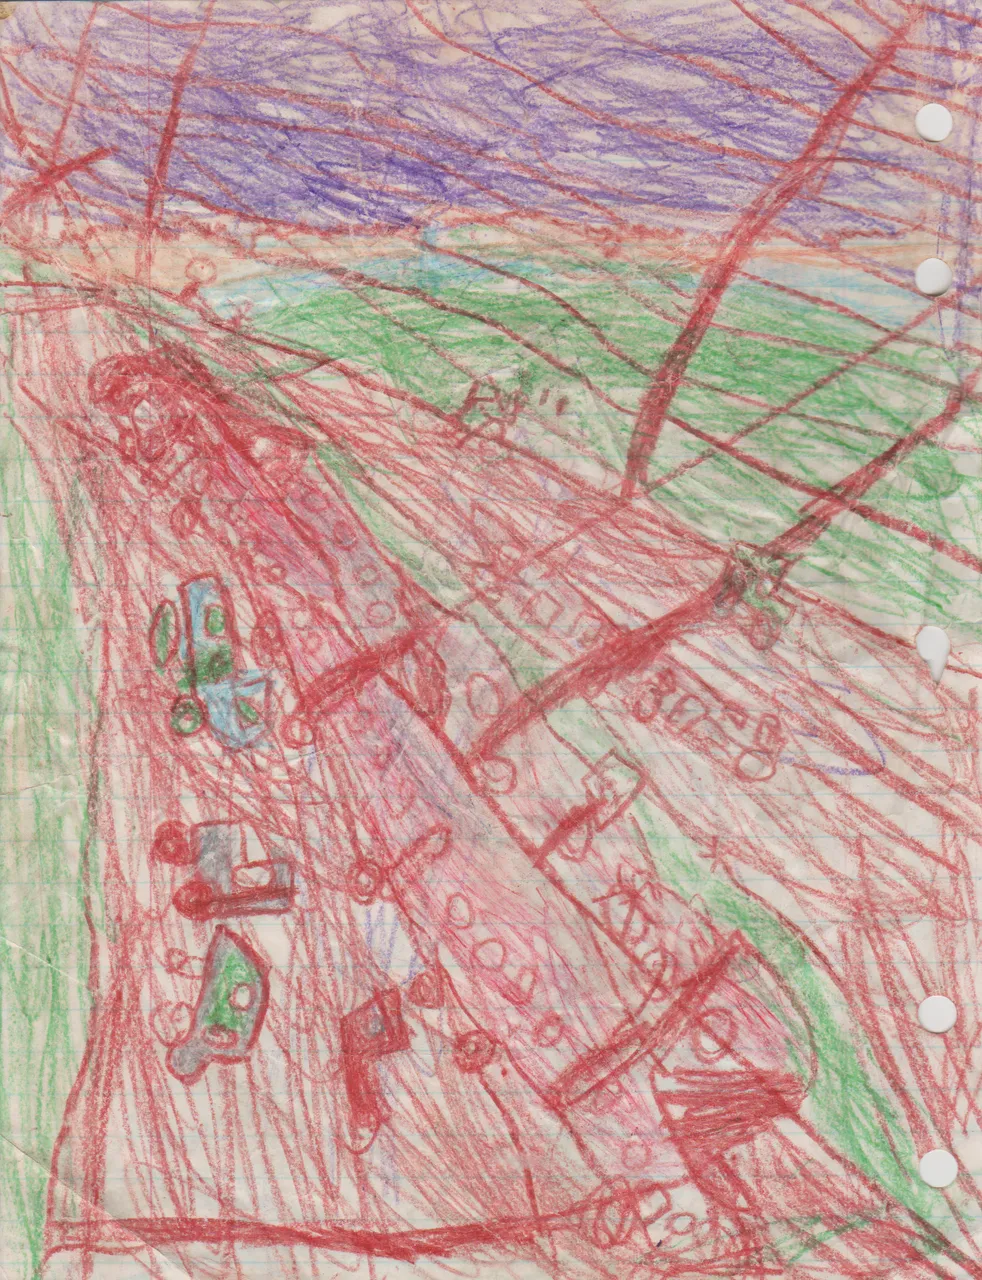 1993 maybe Bridge With Heavy Traffic I-5 over Bridge in PDX maybe Crayons like Golden State Bridge.png